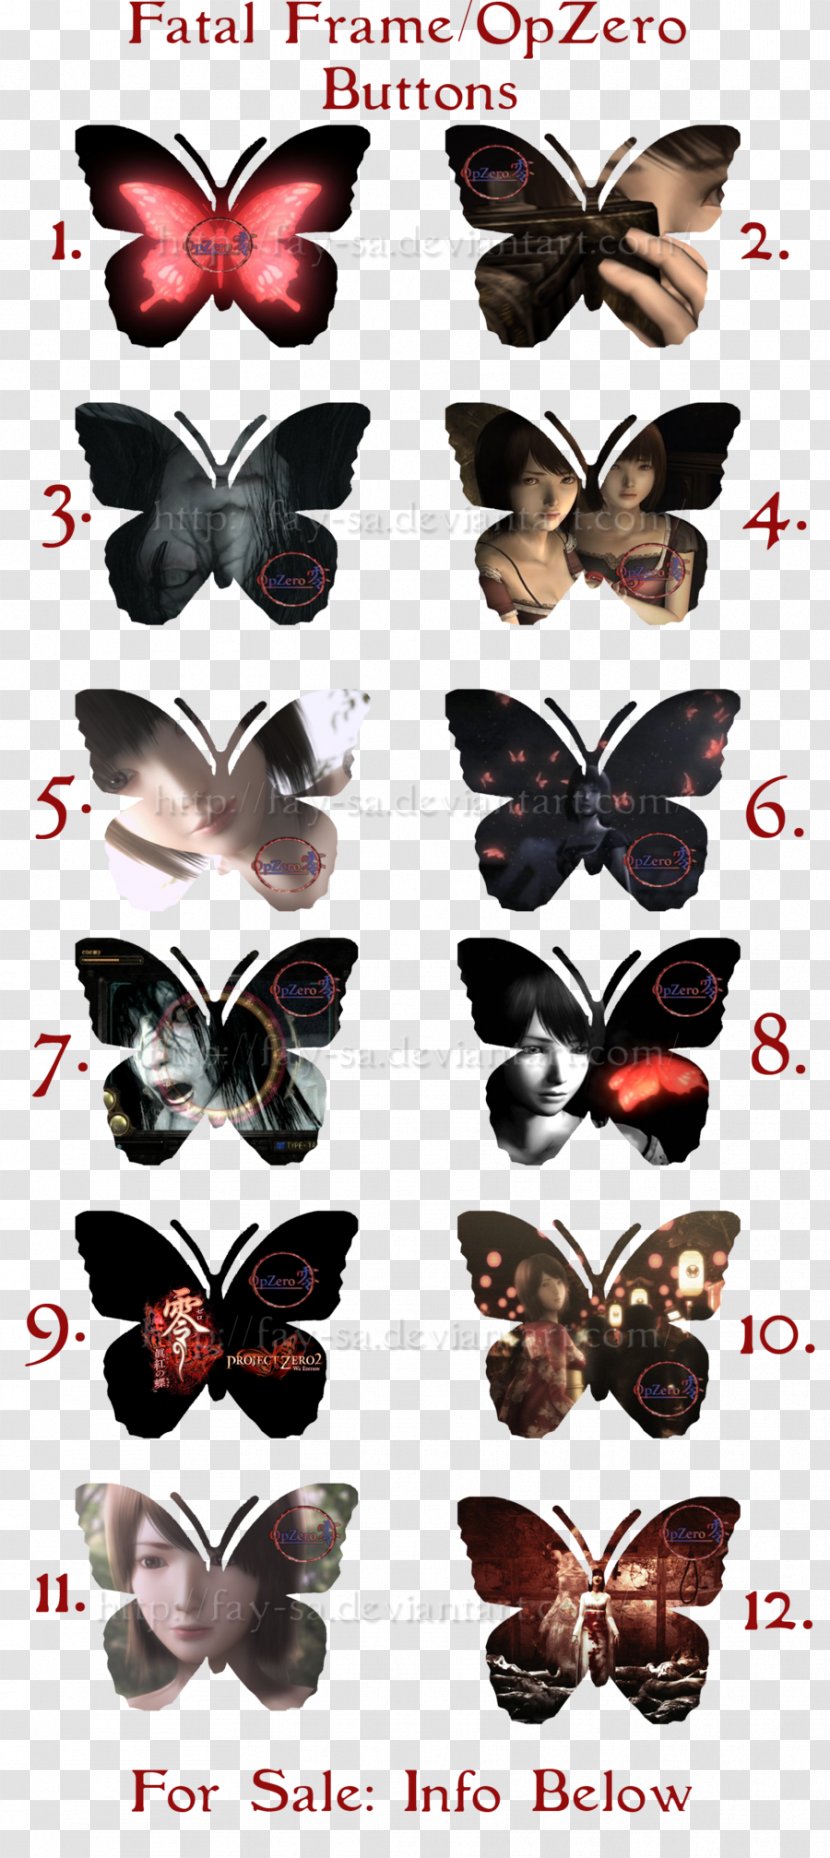 Fatal Frame II: Crimson Butterfly Project Zero 2: Wii Edition III: The Tormented Video Game - Invertebrate - Upgrade Button Transparent PNG